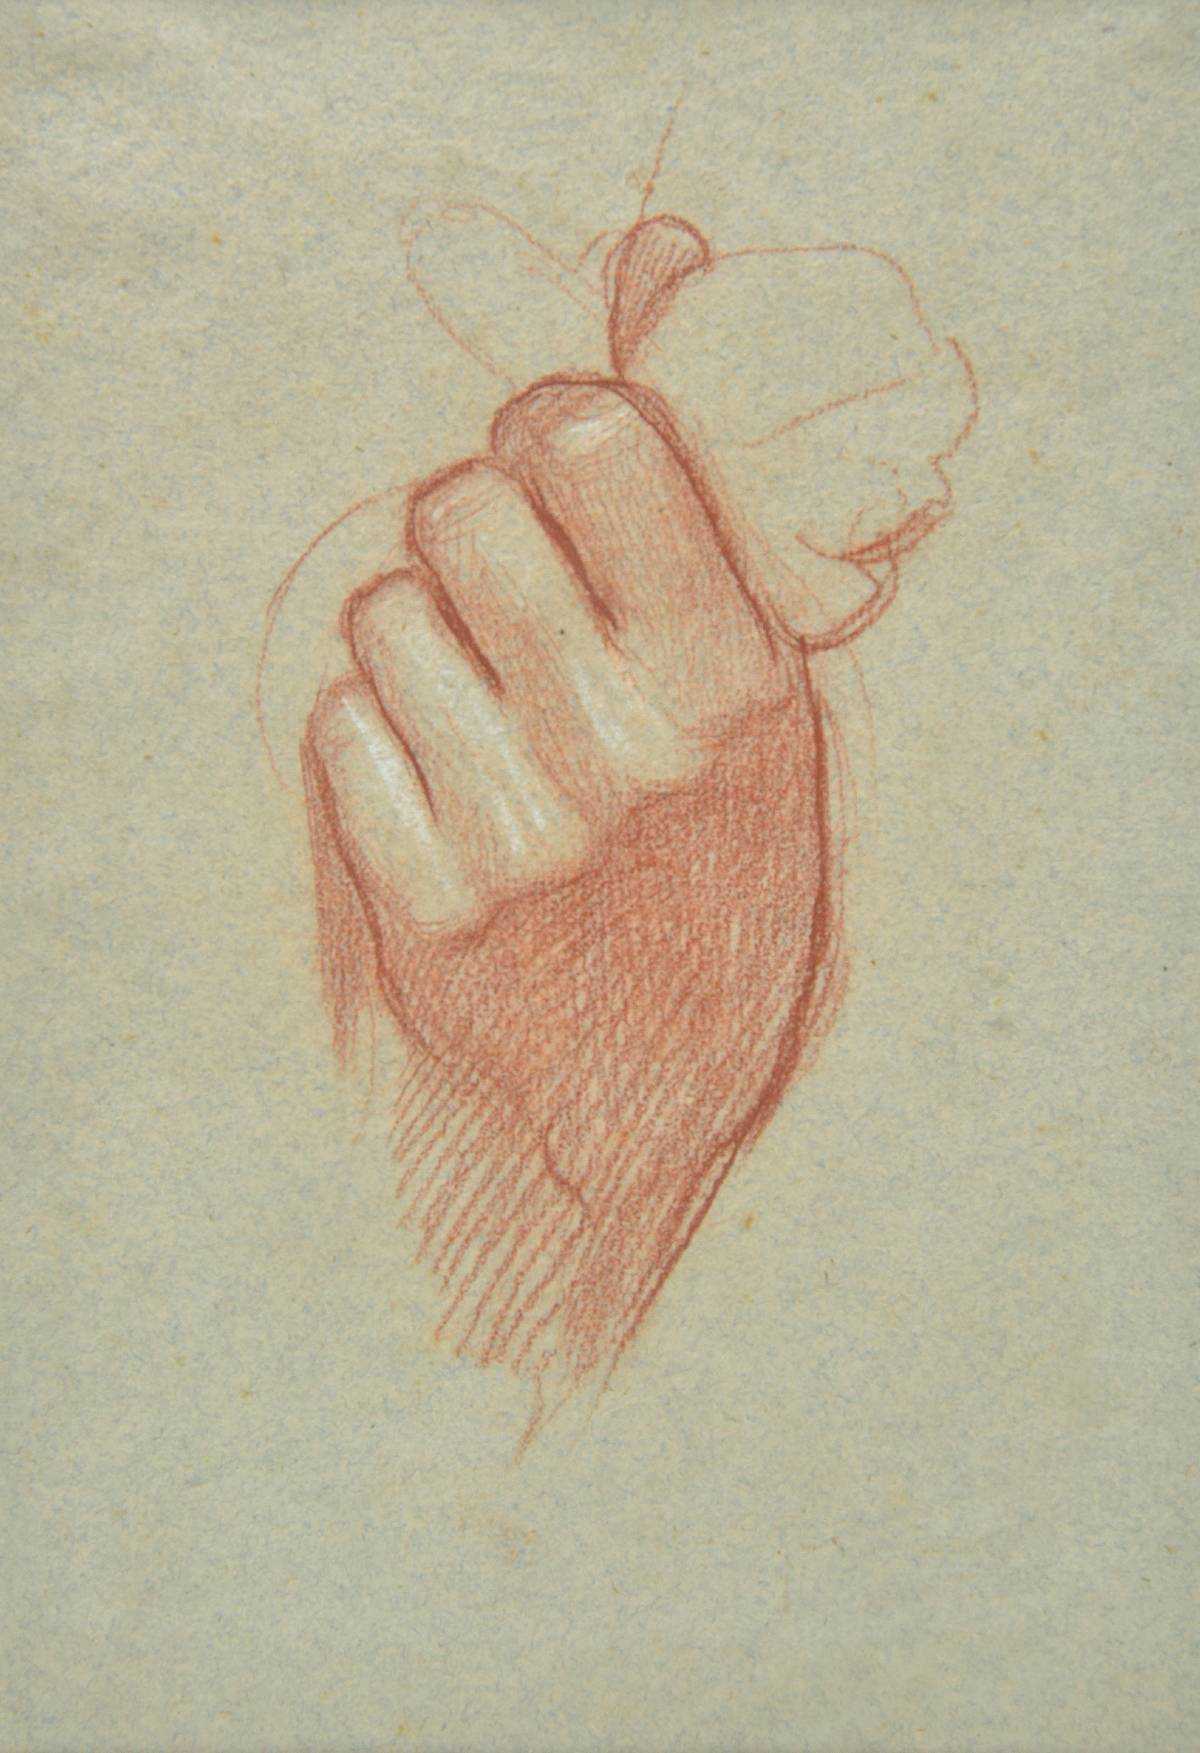 *Richmond (William Blake, 1842-1921). Study of a hand holding a glove, a red chalk on pale blue-grey